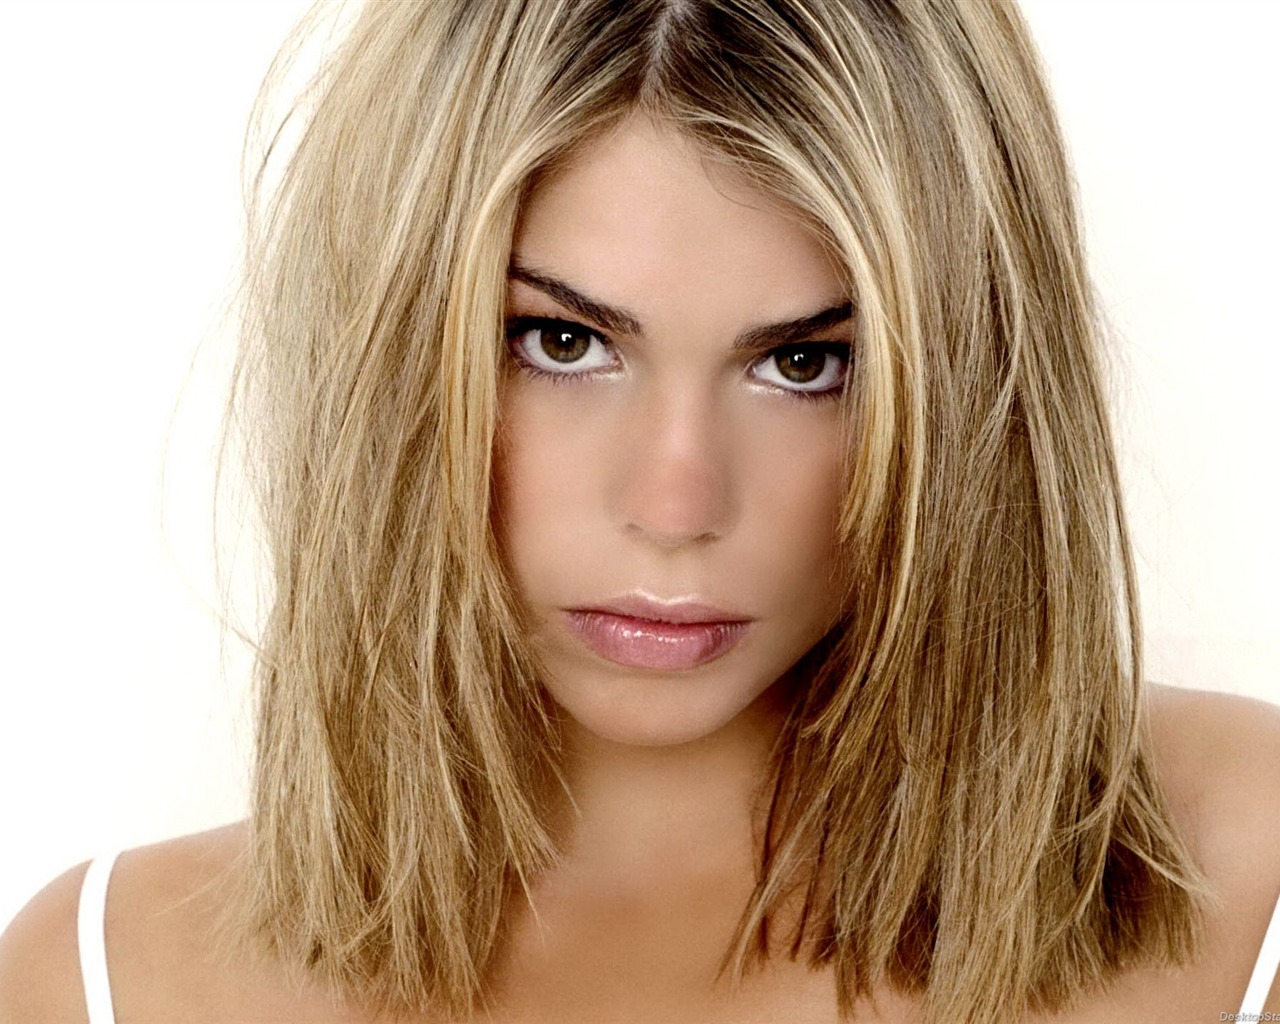 Billie Piper #010 - 1280x1024 Wallpapers Pictures Photos Images